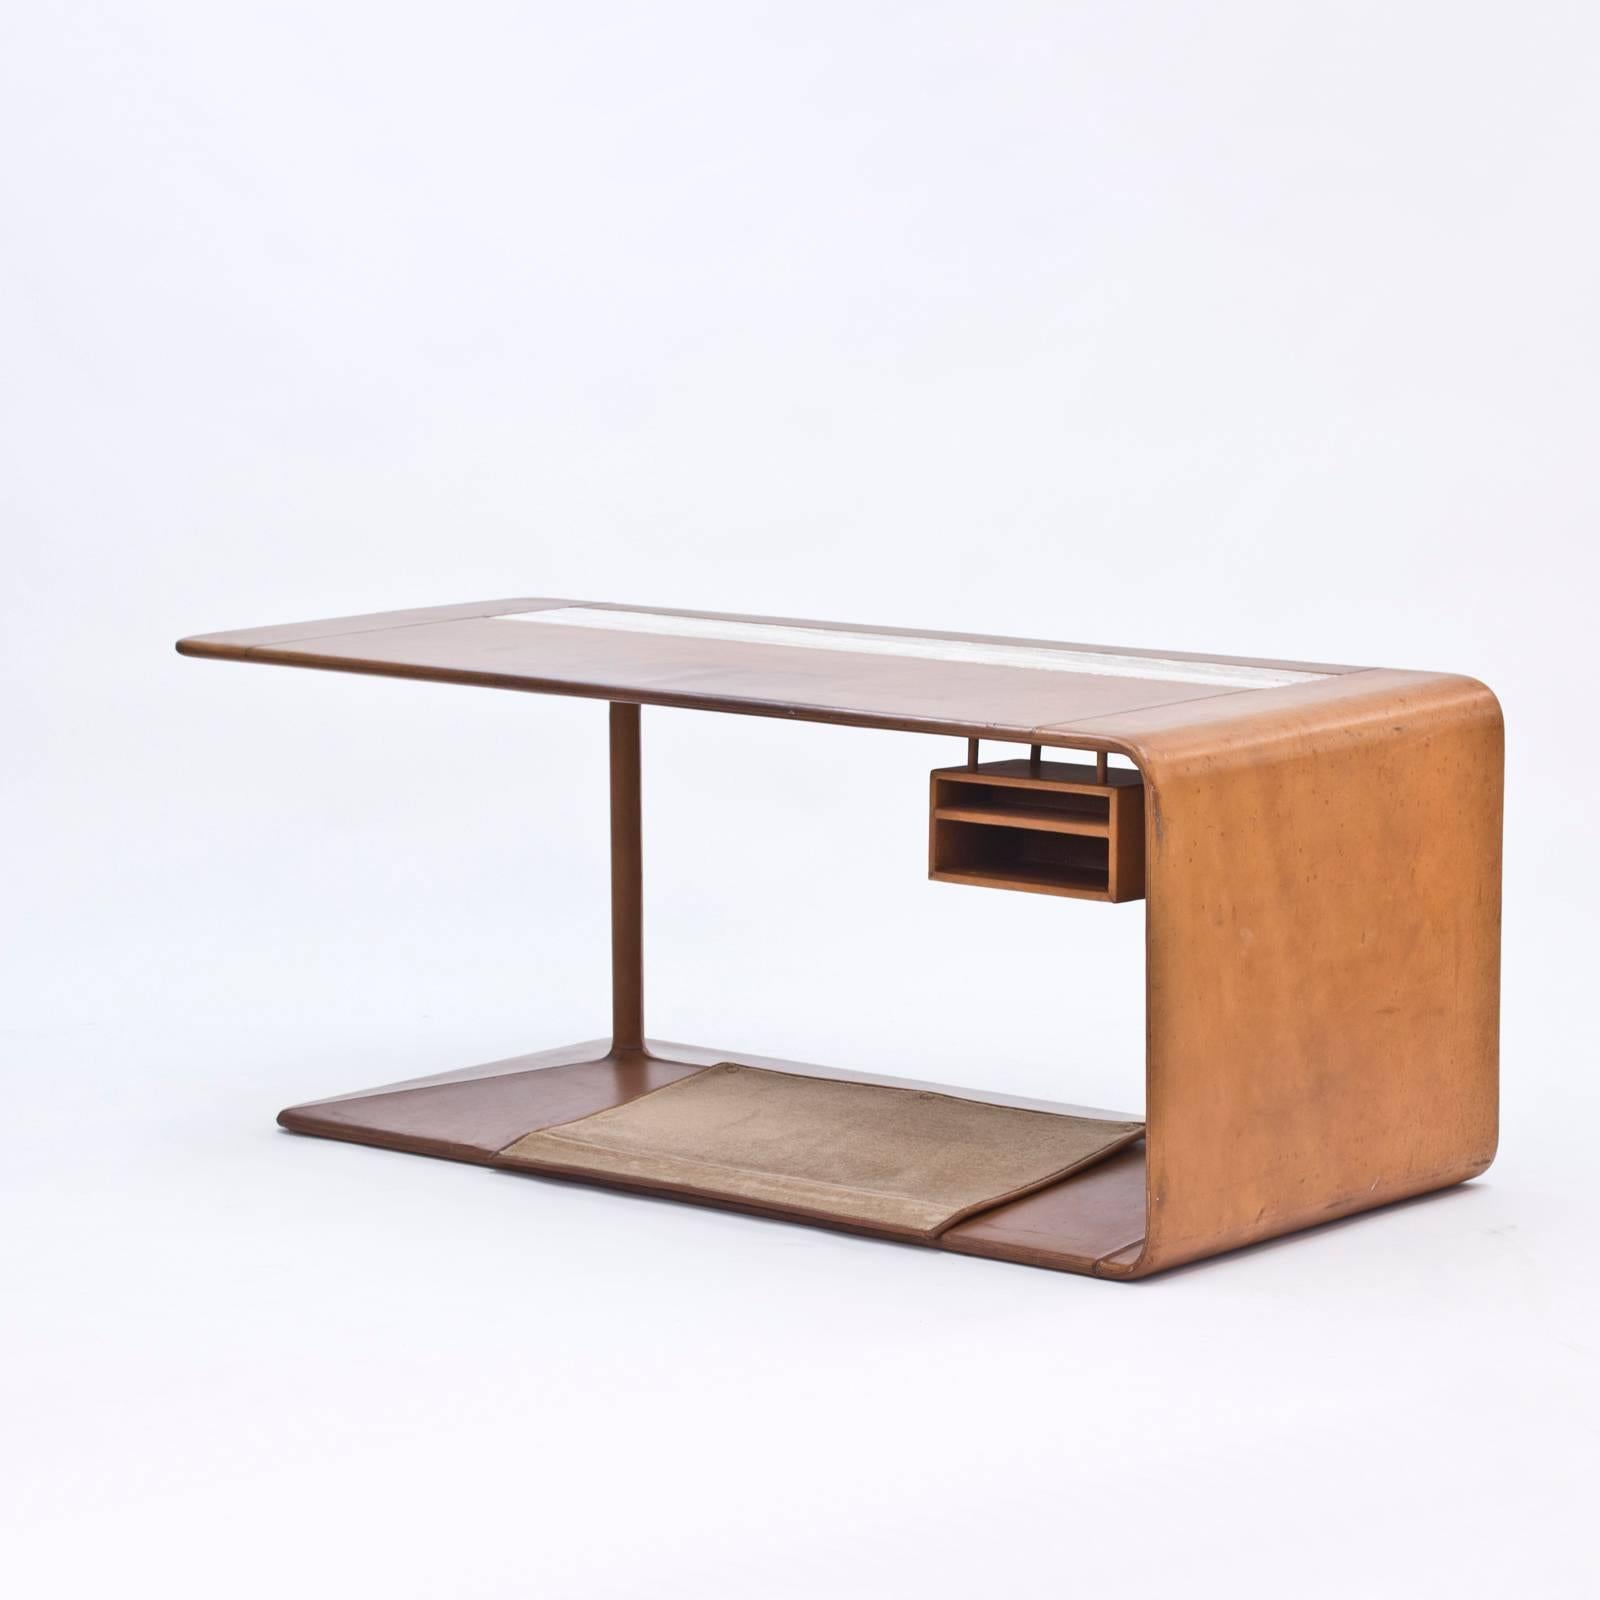 Absolutely stunning leather desk, custom-made by NK in 1965 for an interior in a private residence. The desk has been molded in fiberglass and entirely clad in high quality leather. On the top there is an inlay of off-white and brown-veined marble